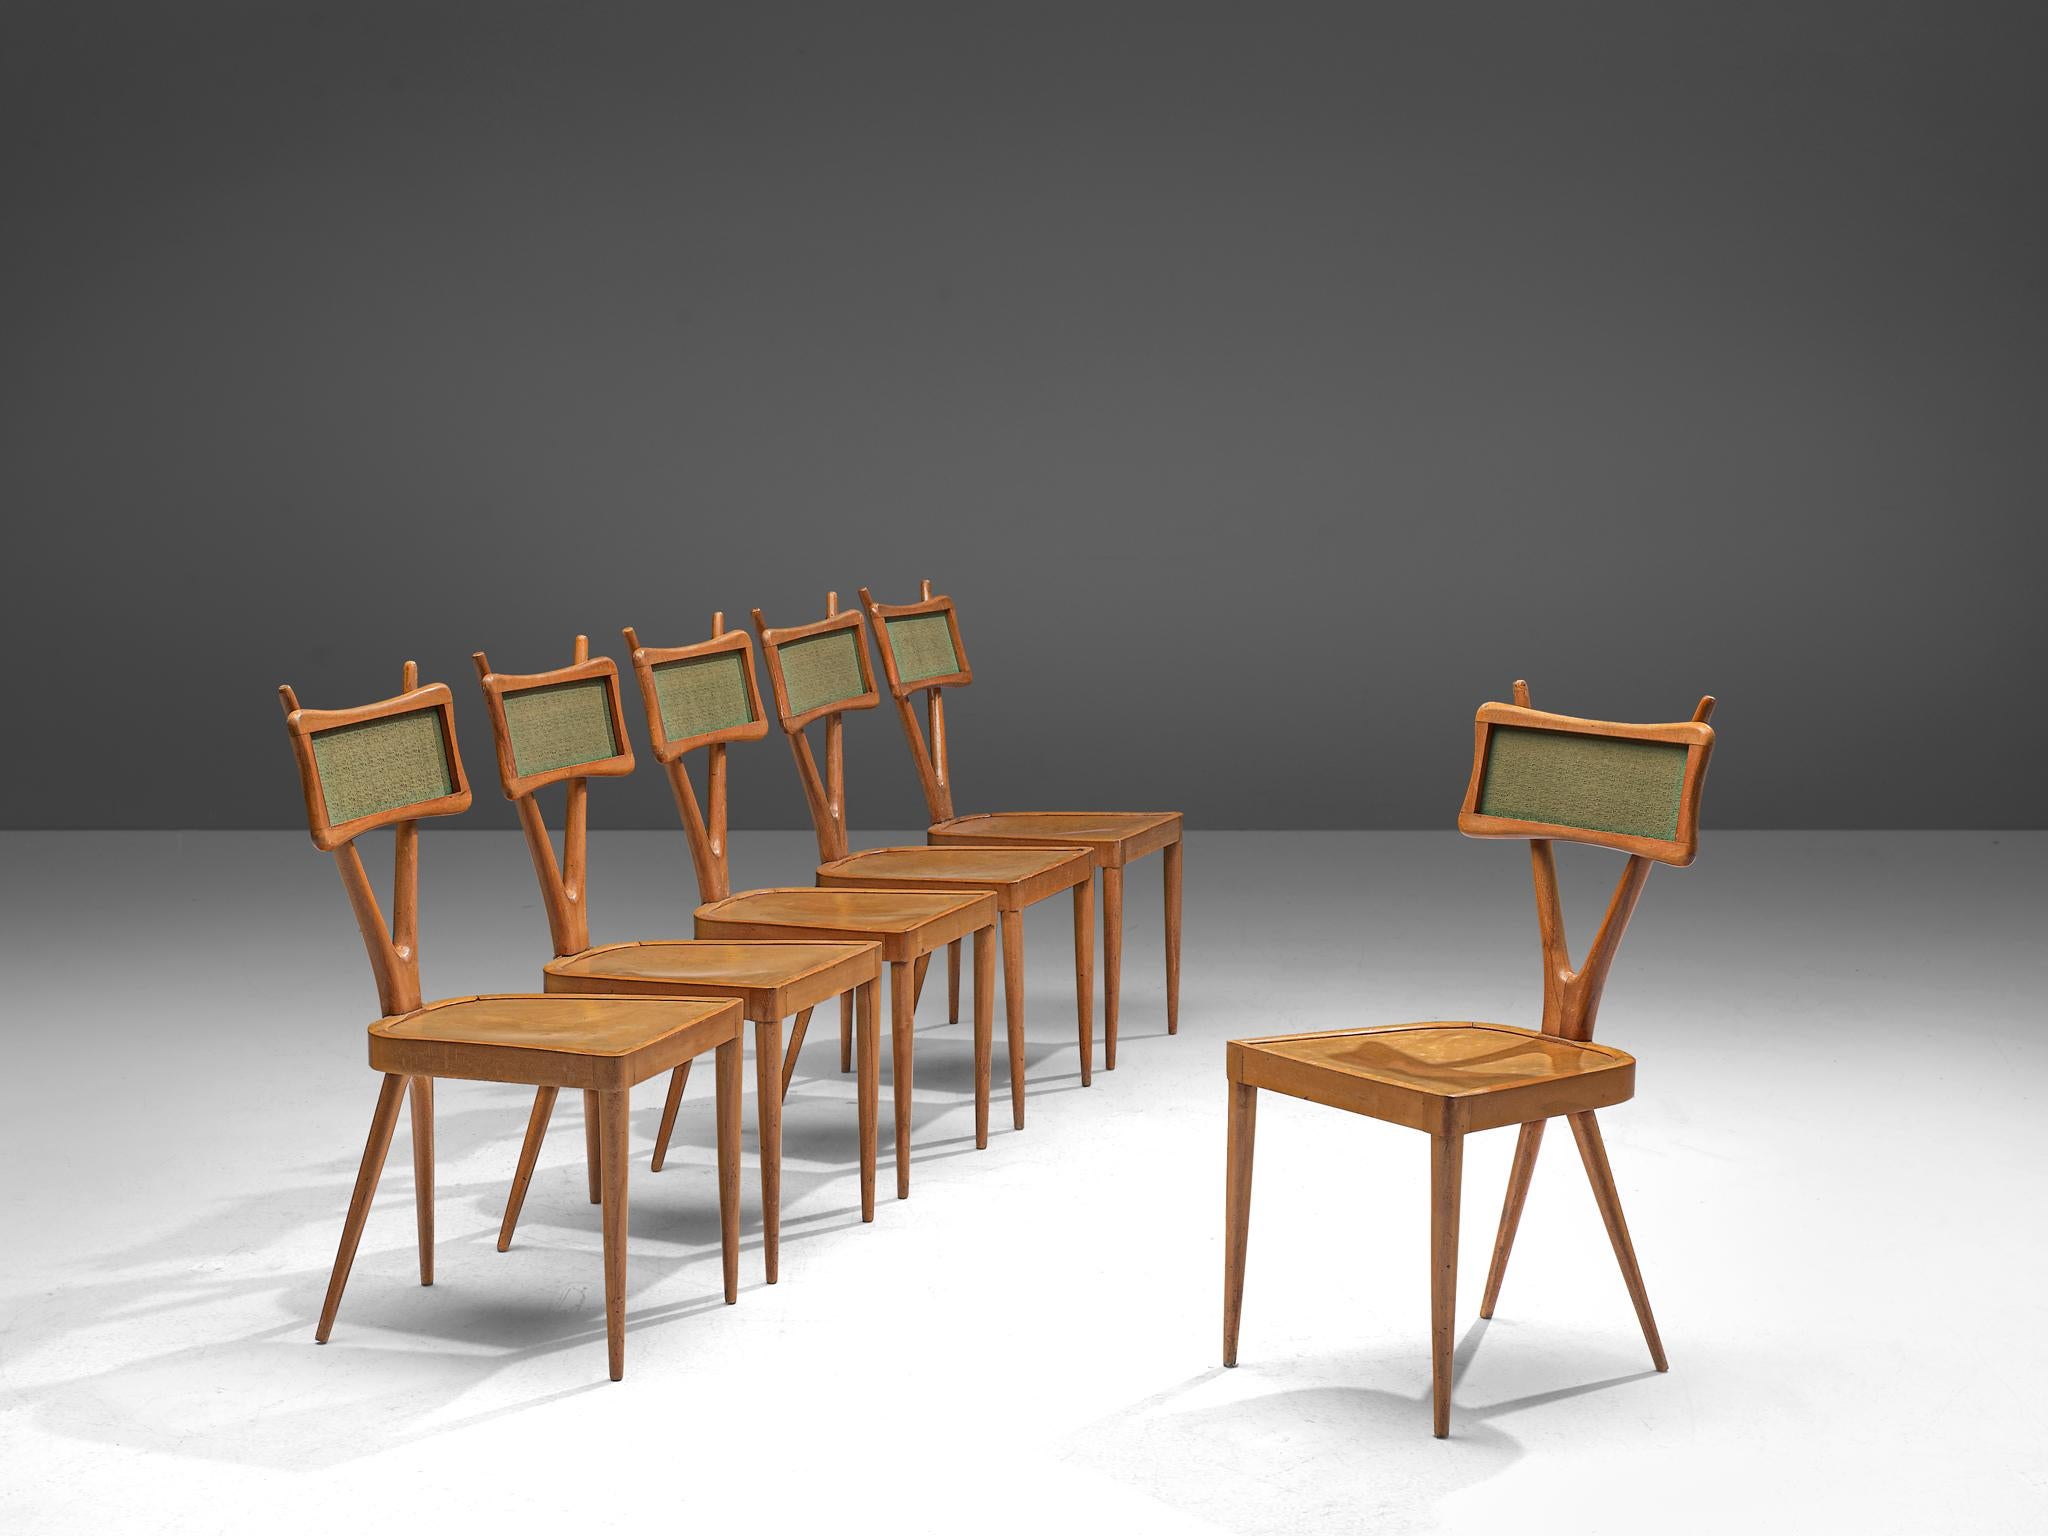 Set of 6 dining chairs, beech and plywood, Italy, 1950s.

Set of 6 Italian dining chairs with characteristic X-shaped backrests. The model is also playful due to the crossed back and green colored backrest. The chairs feature conical tapered legs,